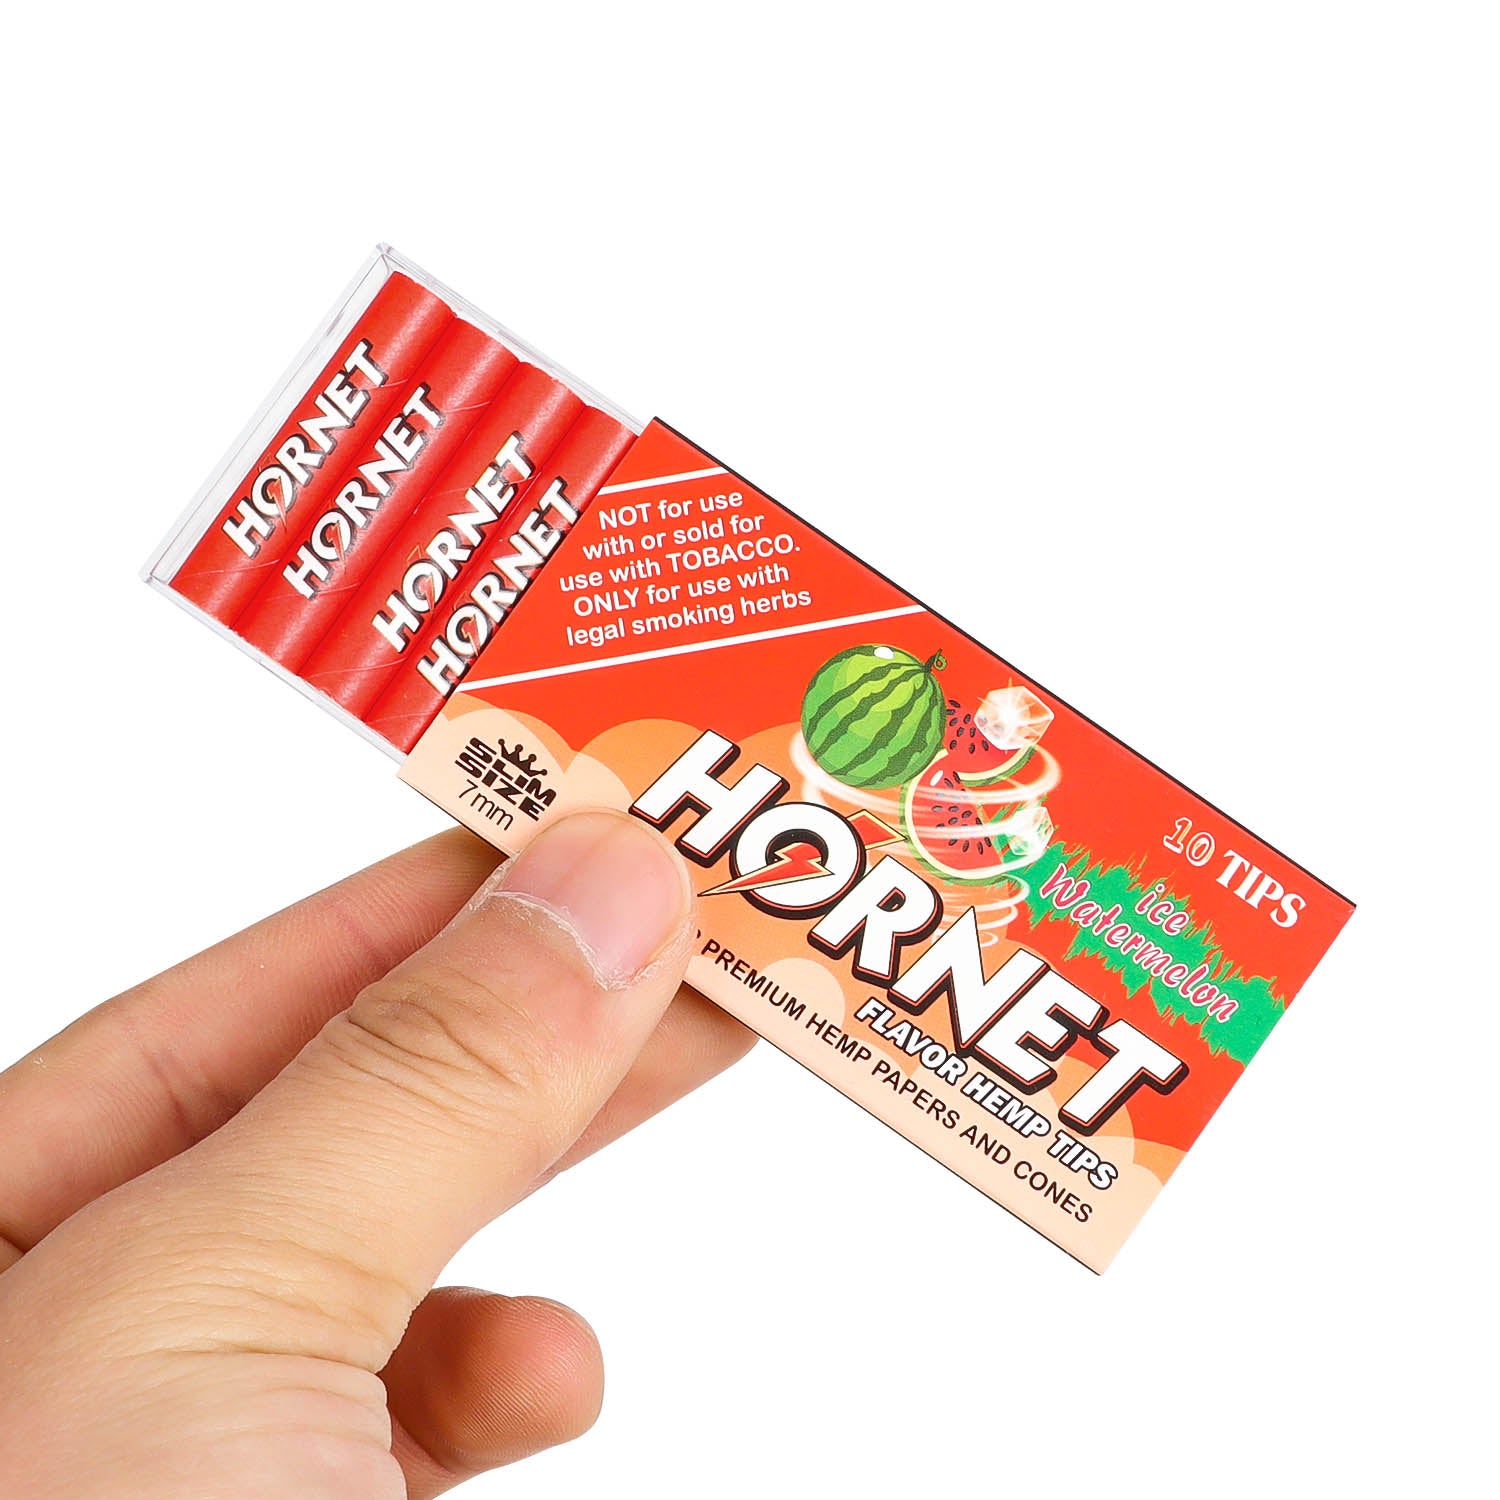 HORNET Watermelon Flavors Filter Tips with Flavored Pop, 7 mm Filter Tips, 10 Tips / Pack 24 Packs / Box